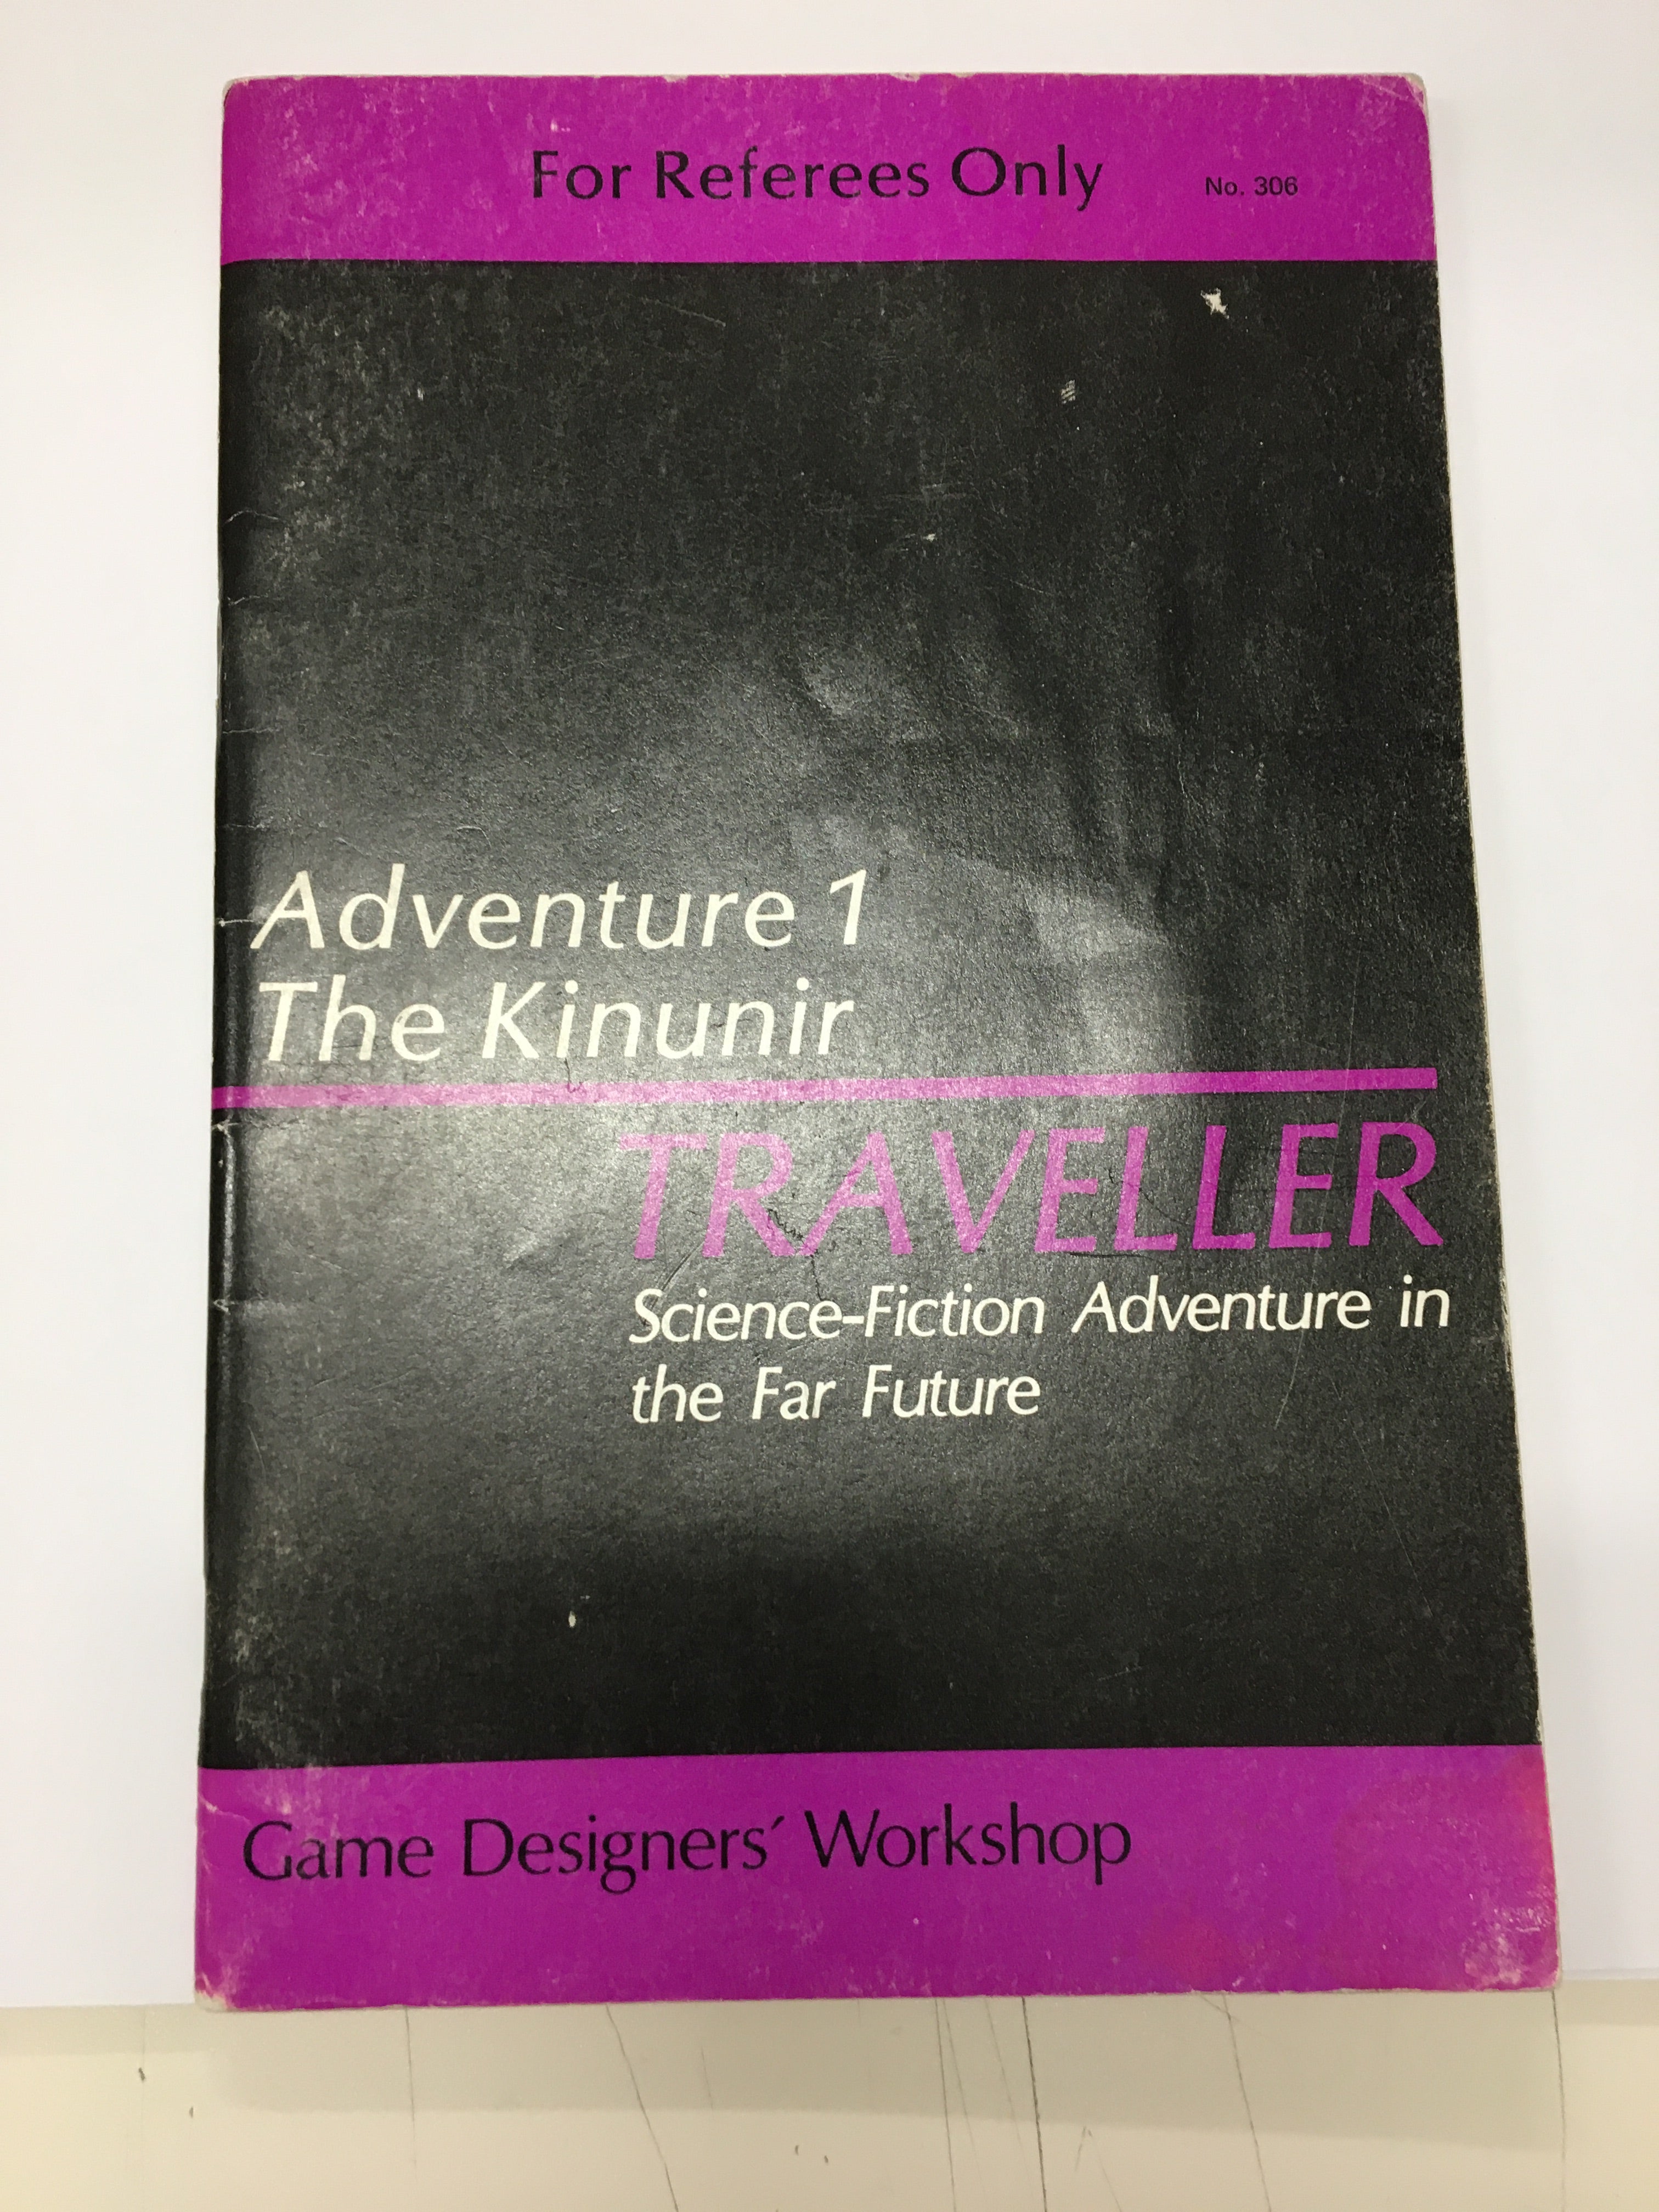 Traveller Adventure 1: The Kinunir used | L.A. Mood Comics and Games